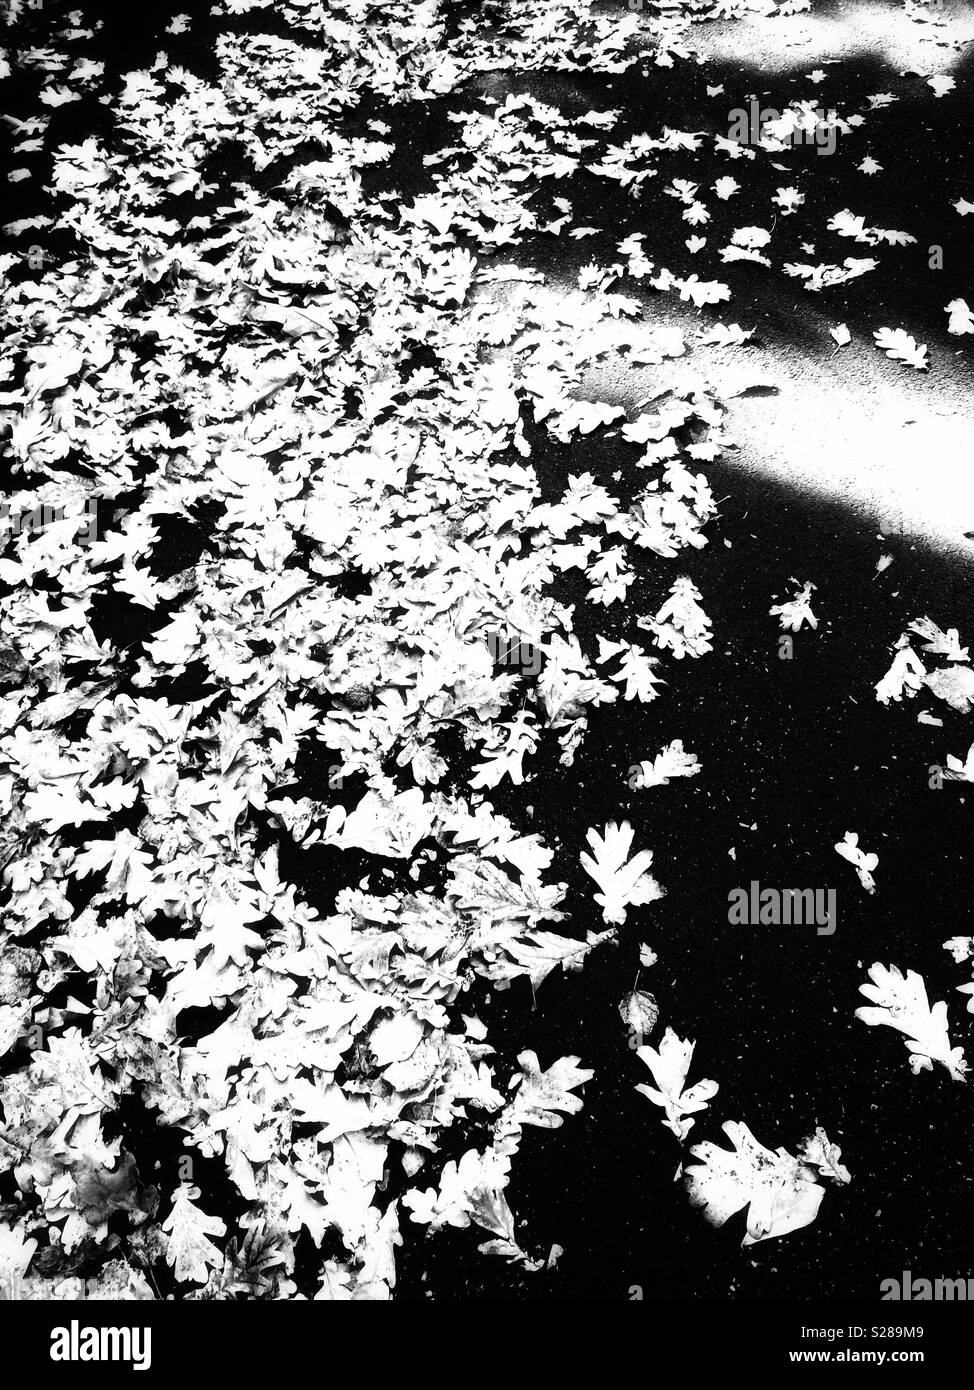 Black and white creative and abstract view of carpet of Oak leaves lying on pavement or sidewalk with beam of light crossing it Stock Photo